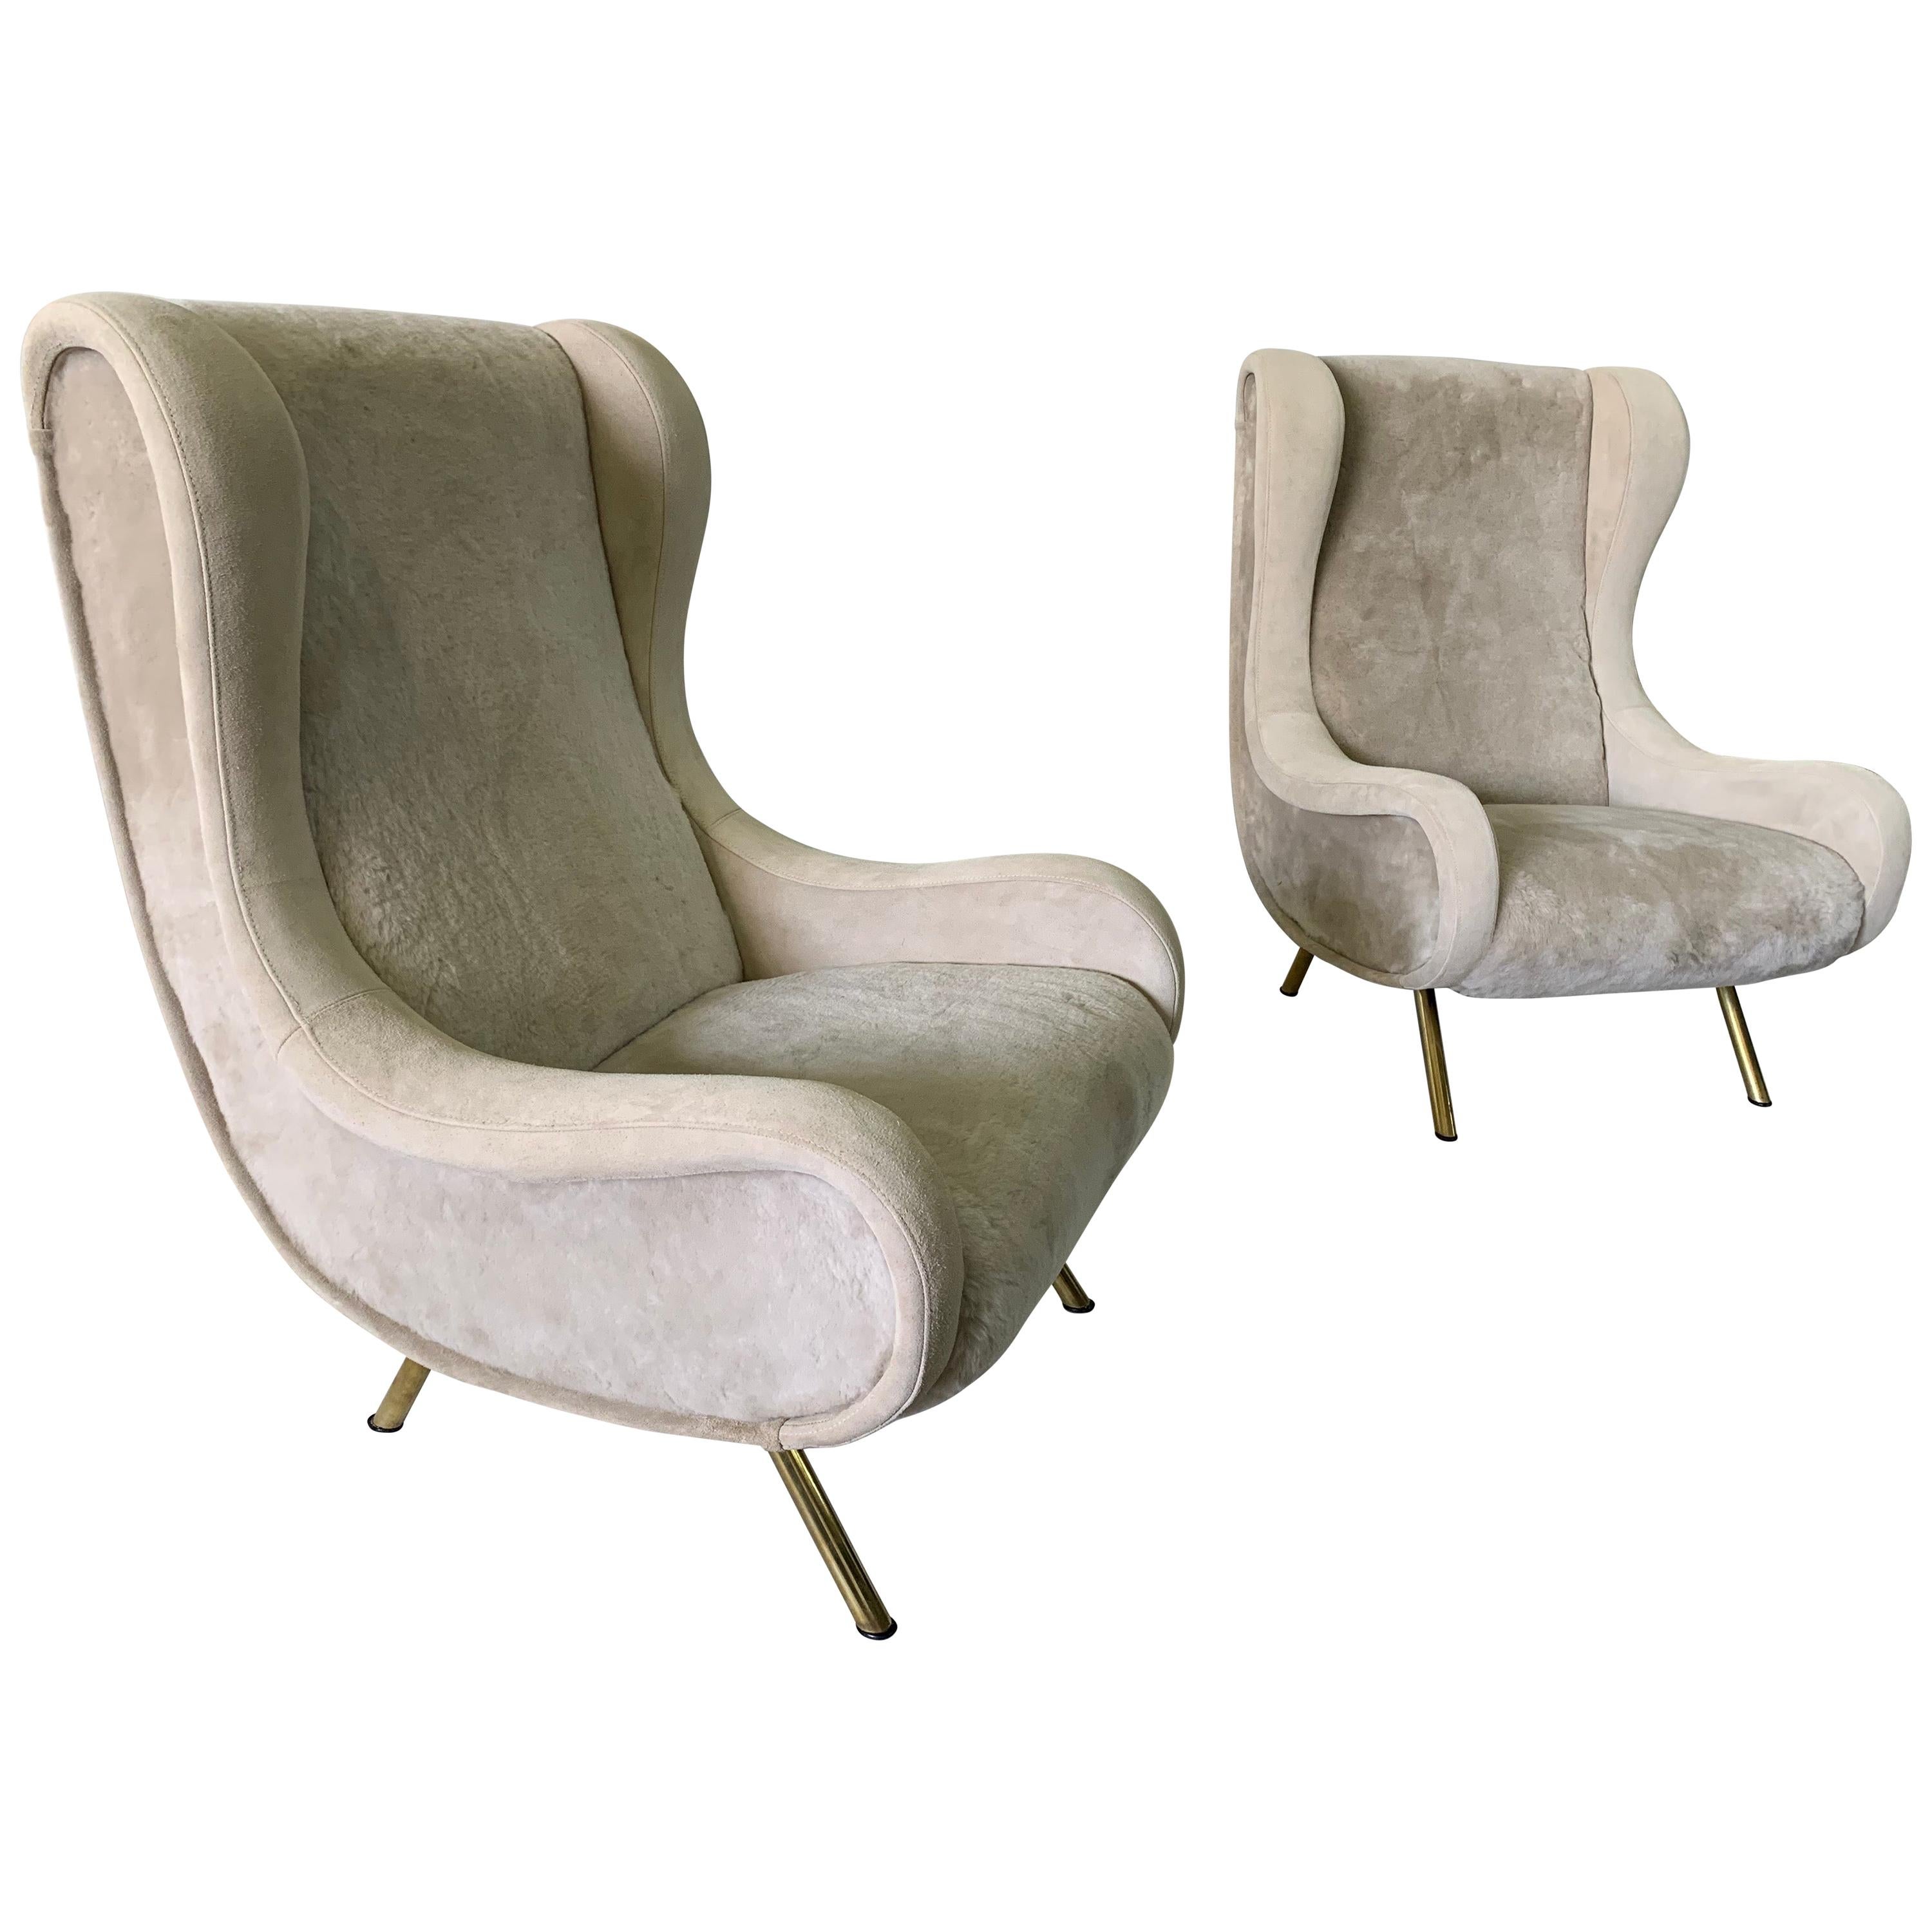 Senior Zanuso Armchairs in Shearling Wool and Suede Upholstery, Pair